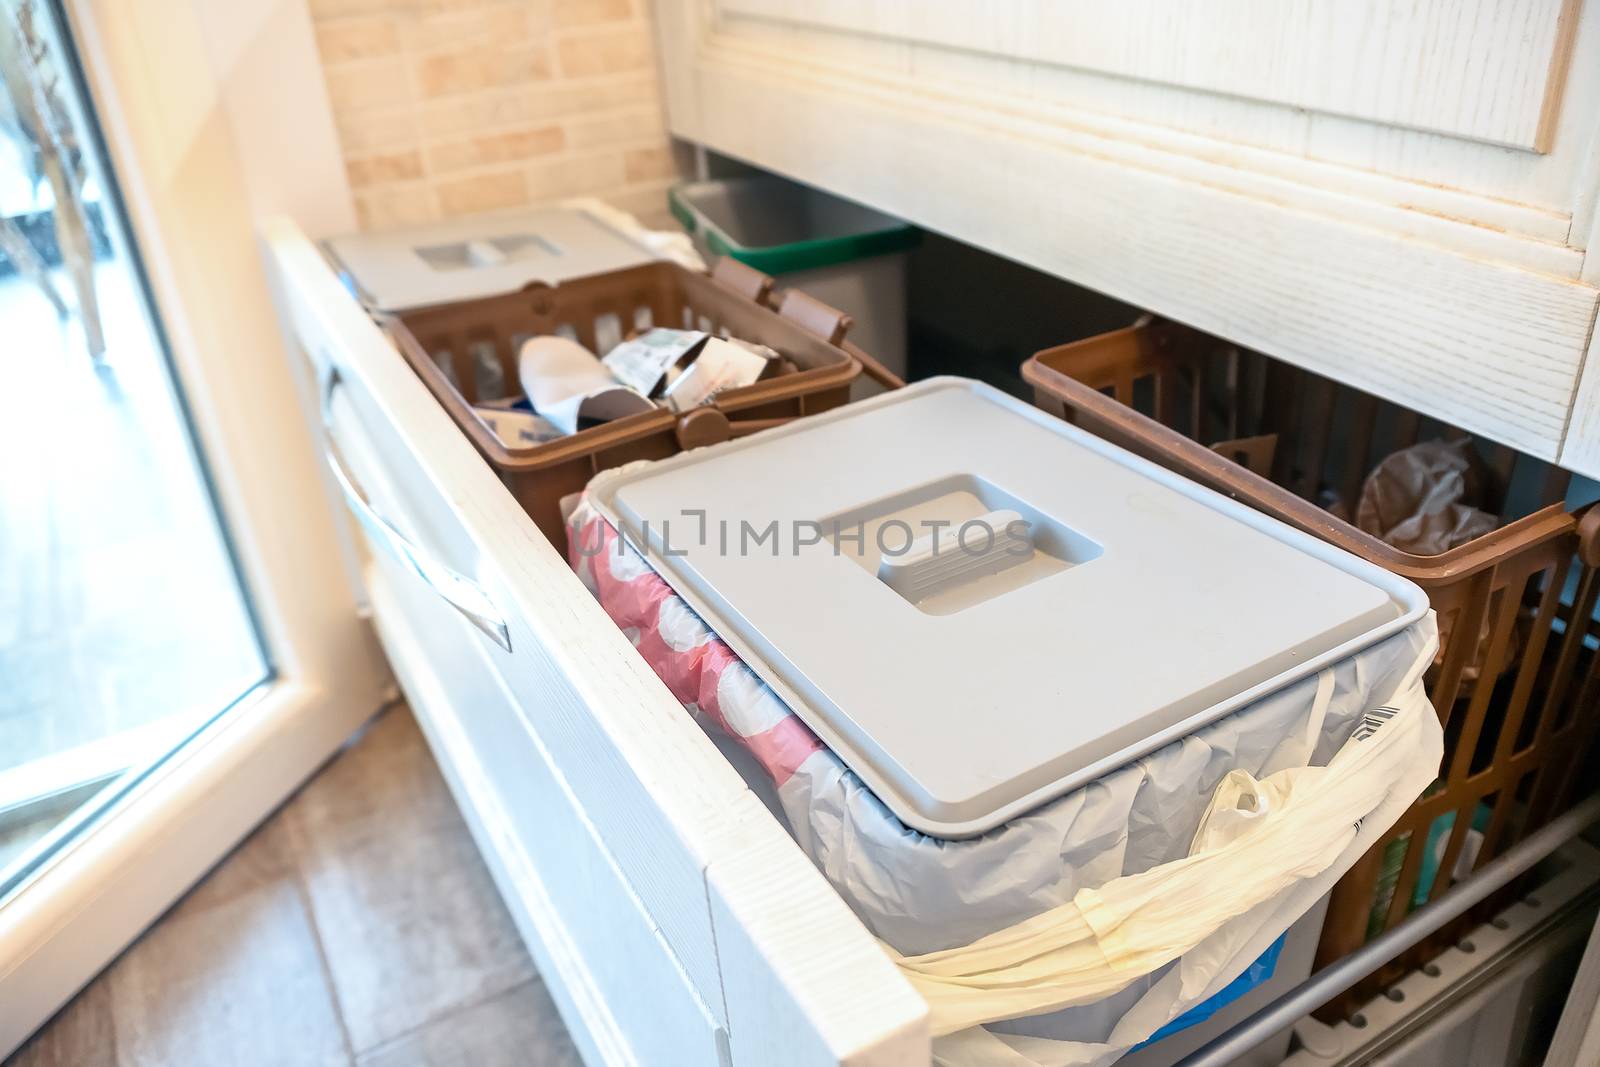 Waste sorting drawer recycling kitchen home chores